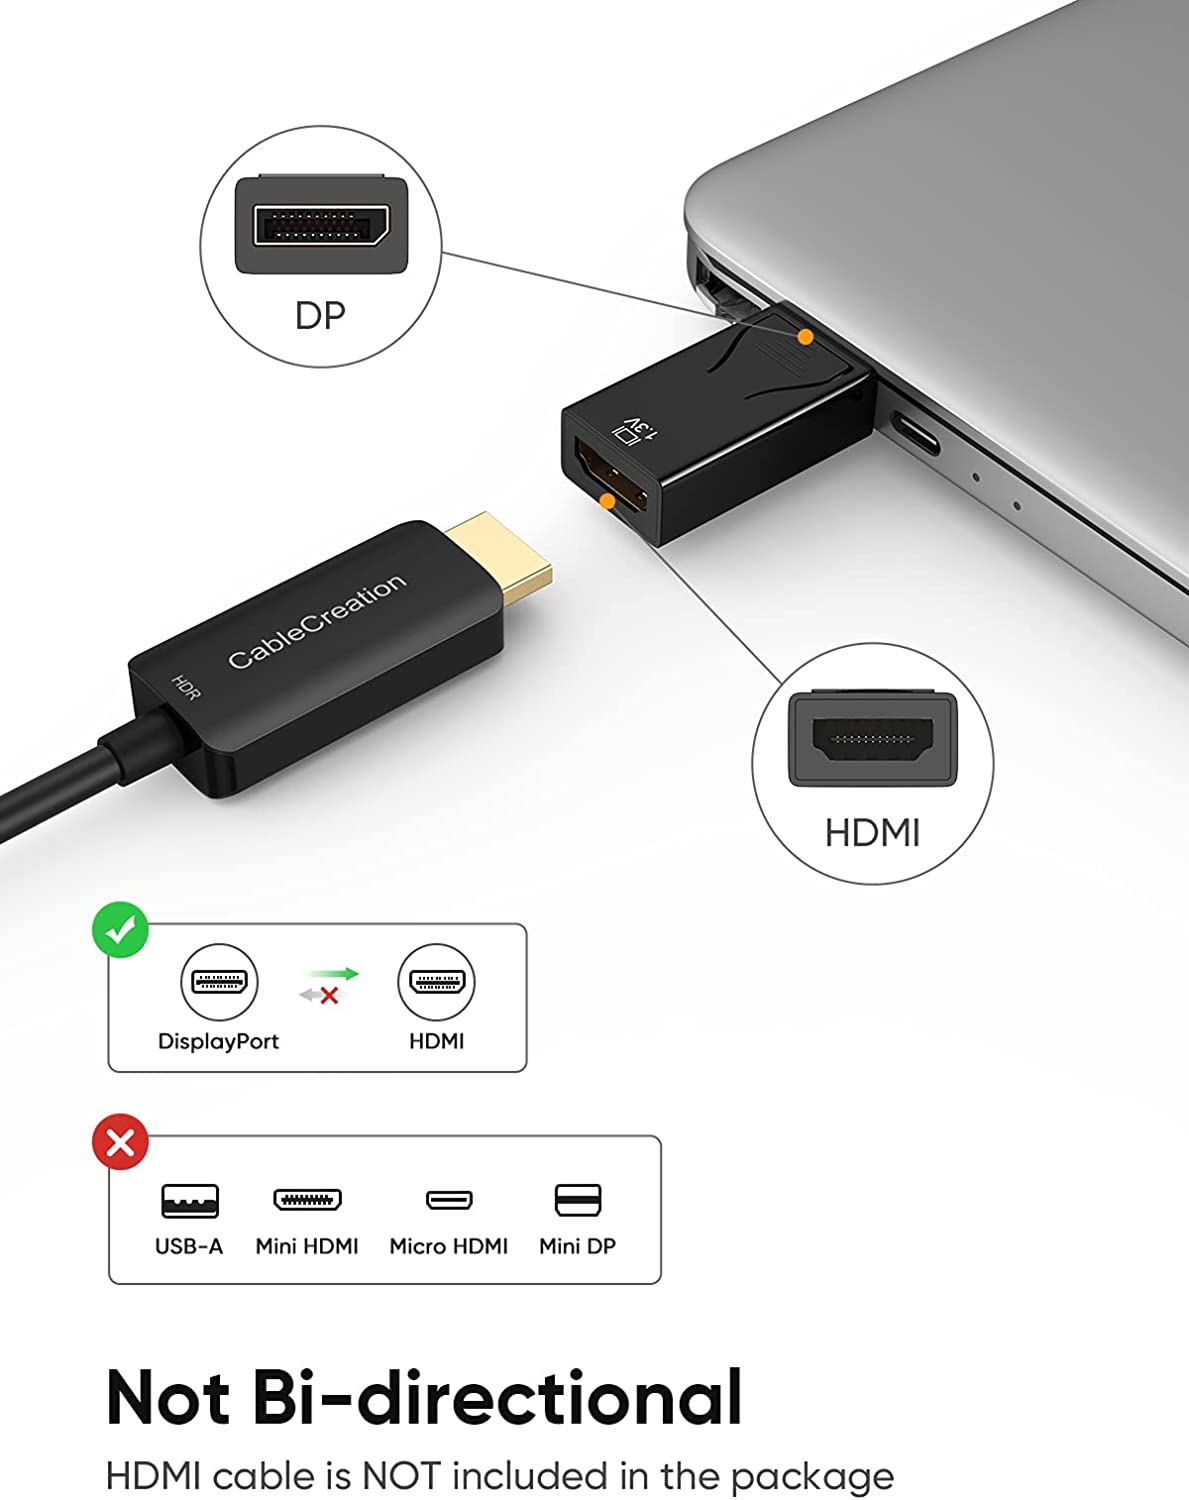 unidirectional transfer signal from DisplayPort to HDMI